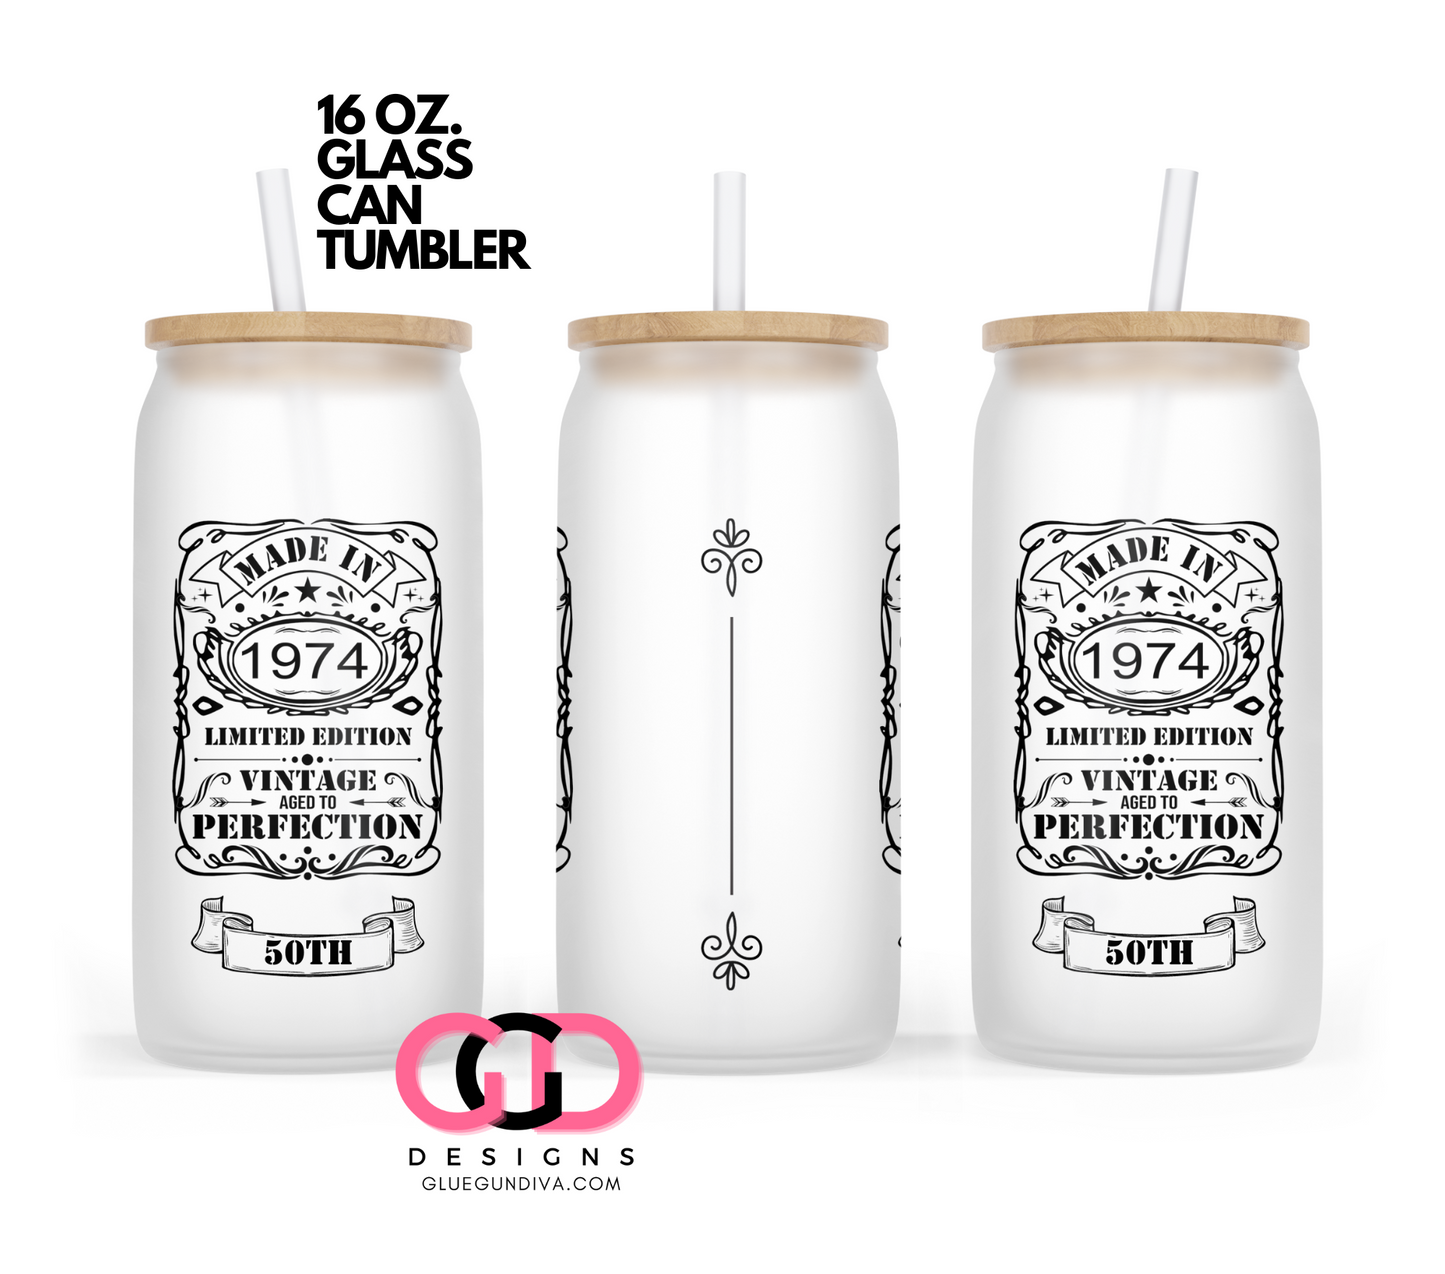 Made in 1974 50th-   Digital wrap for 16 oz glass can